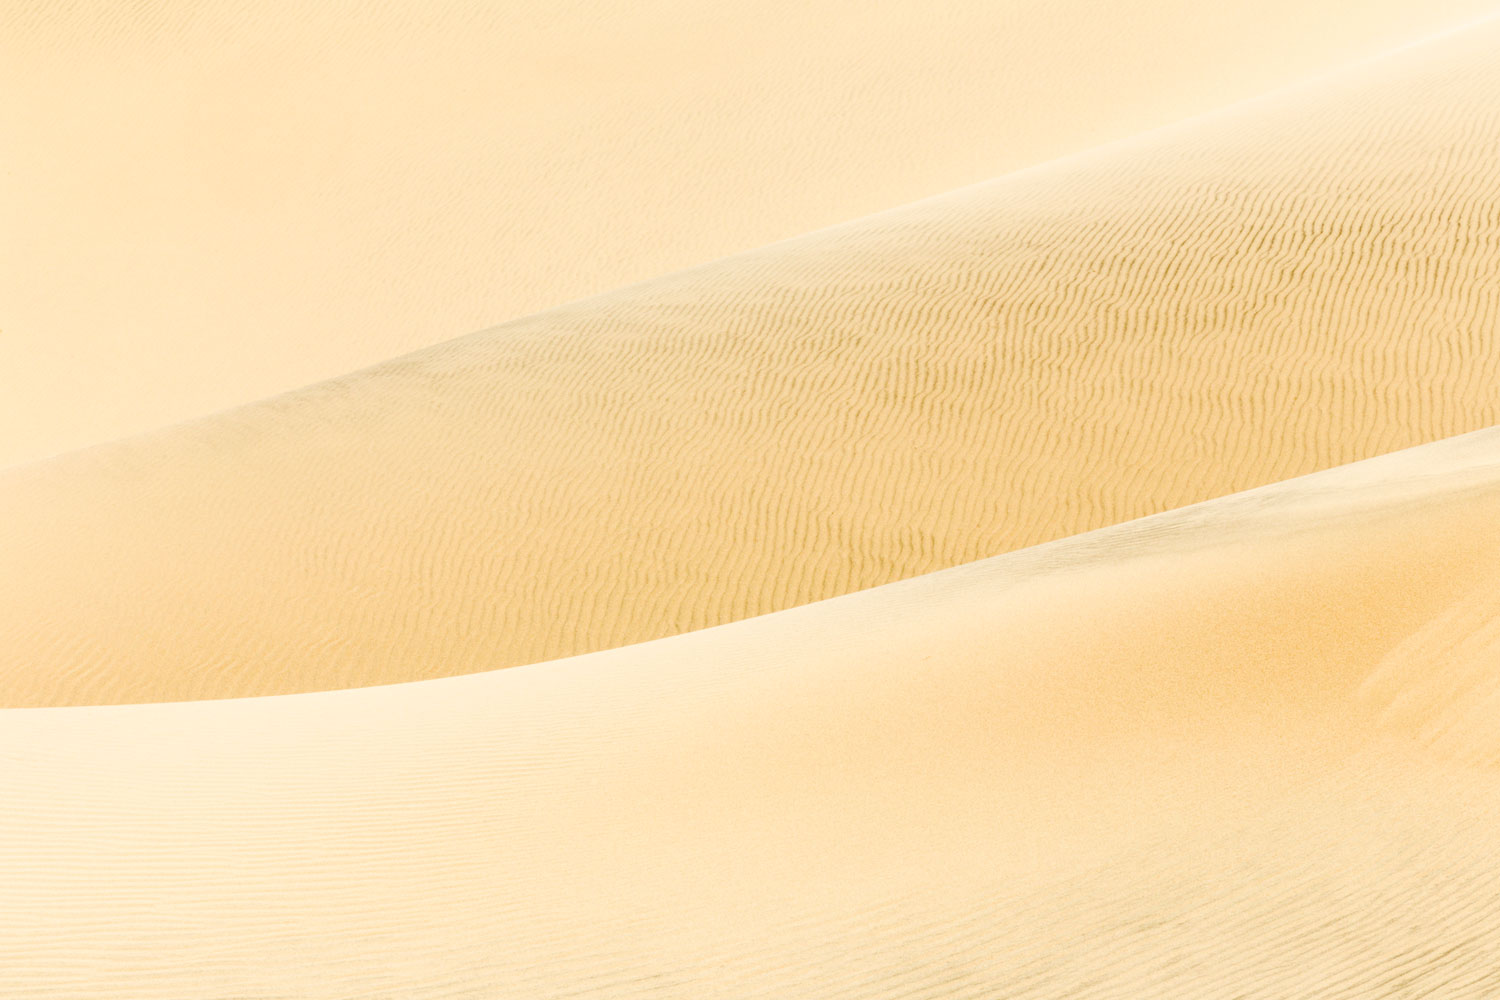 Dune Layers. Death Valley National Park, CA